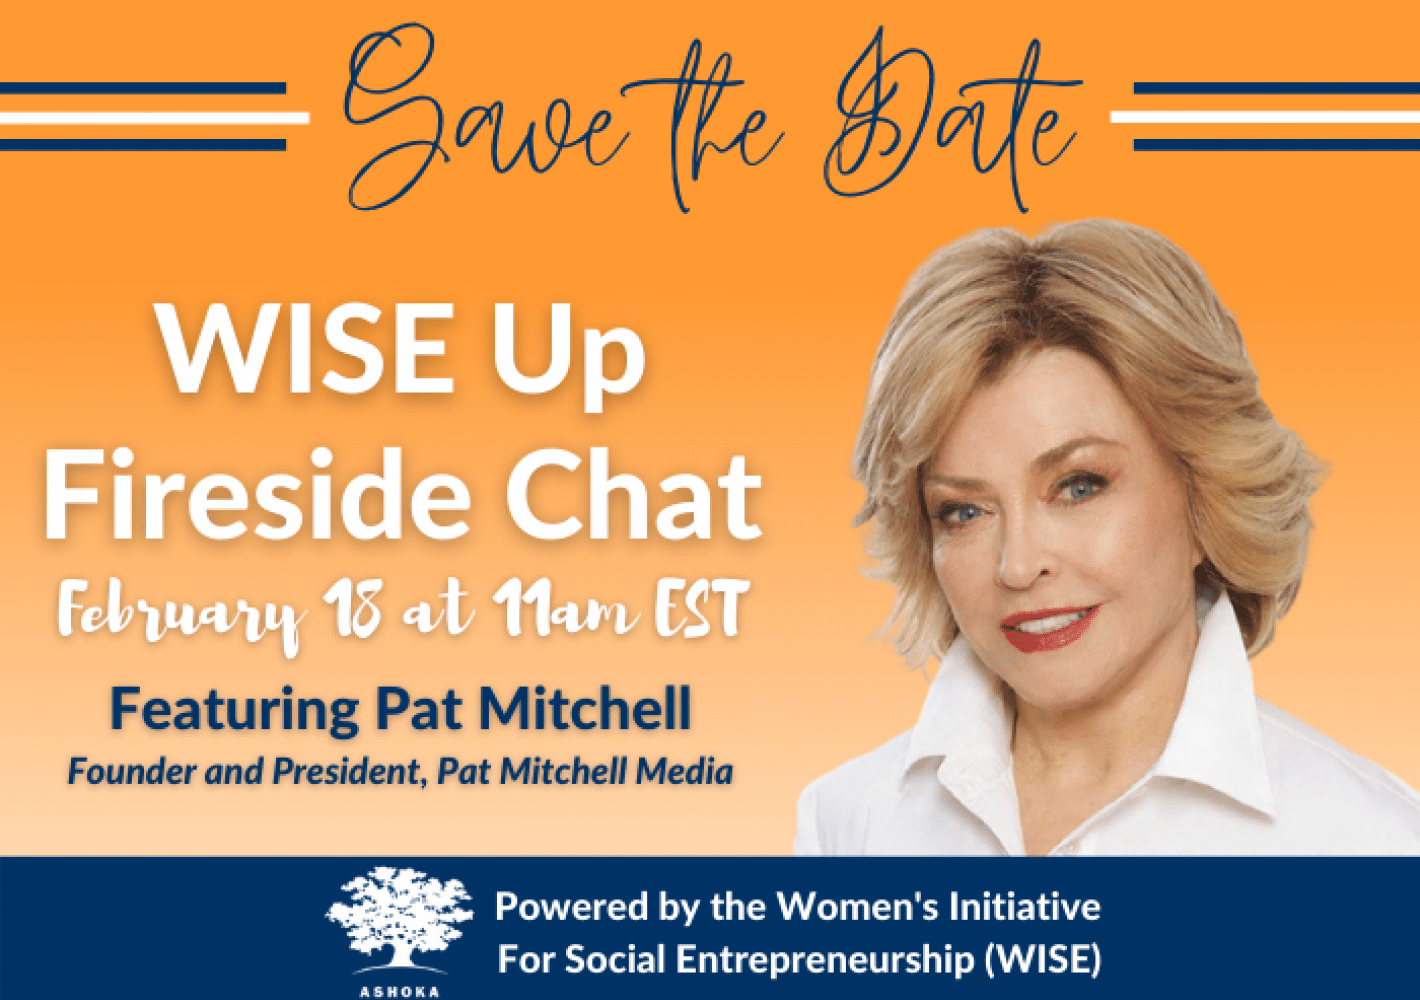 WISE Up Fireside chat with Pat Michell